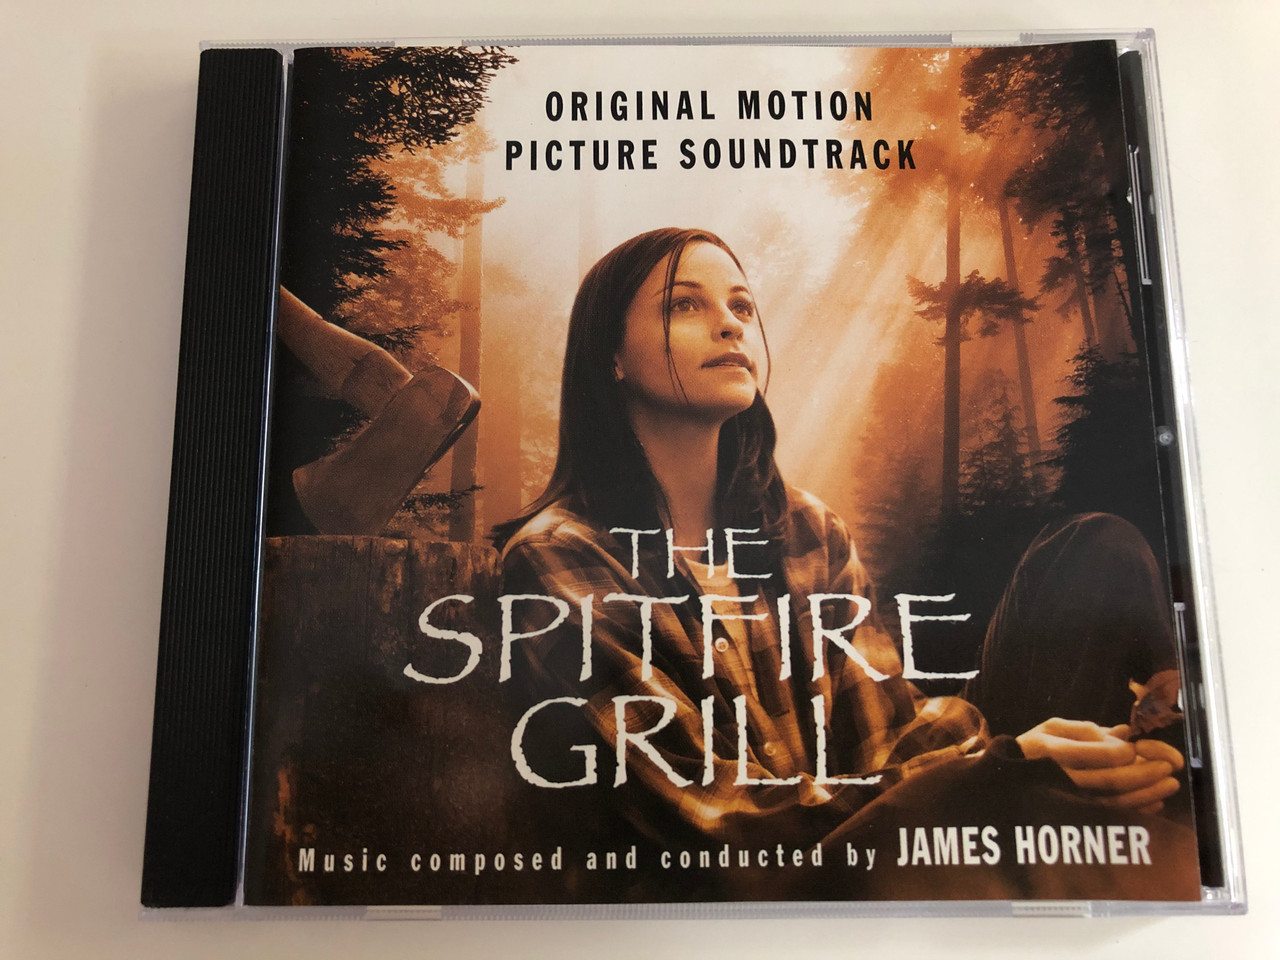 Original Motion Picture Soundtrack - The Spitfire Grill / Music composed  and conducted by James Horner ‎/ Sony Classical ‎Audio CD 1996 / SK 62776 -  Bible in My Language